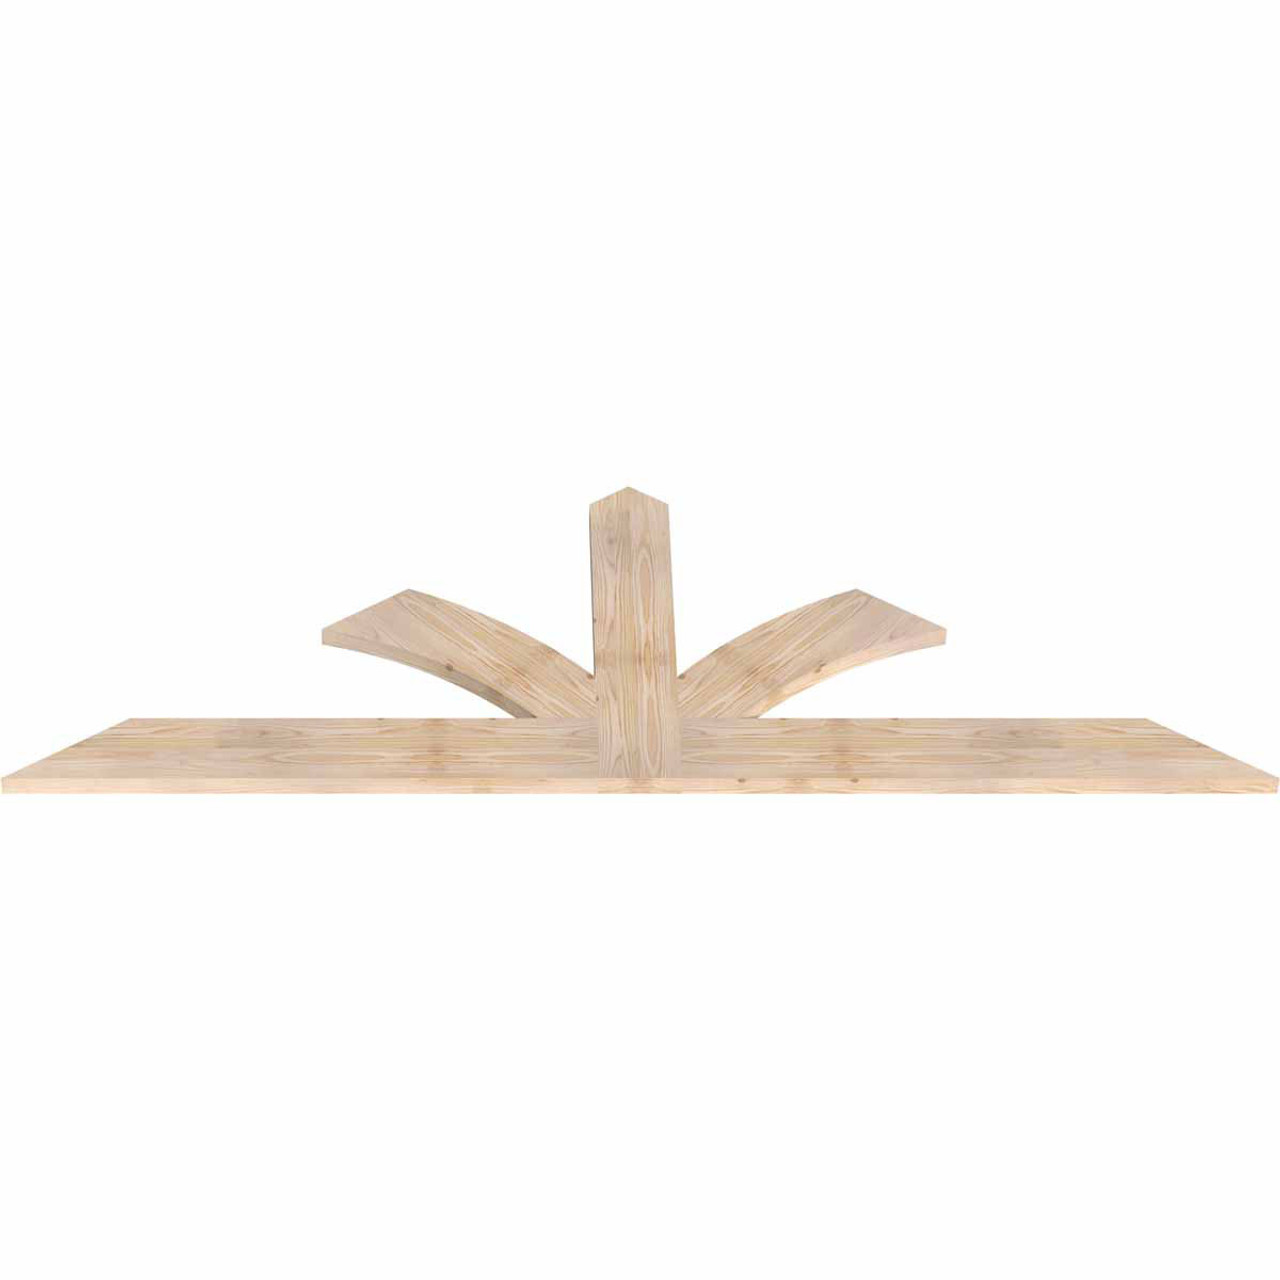 8/12 Pitch Richland Smooth Timber Gable Bracket GBW084X28X0206RIC00SDF